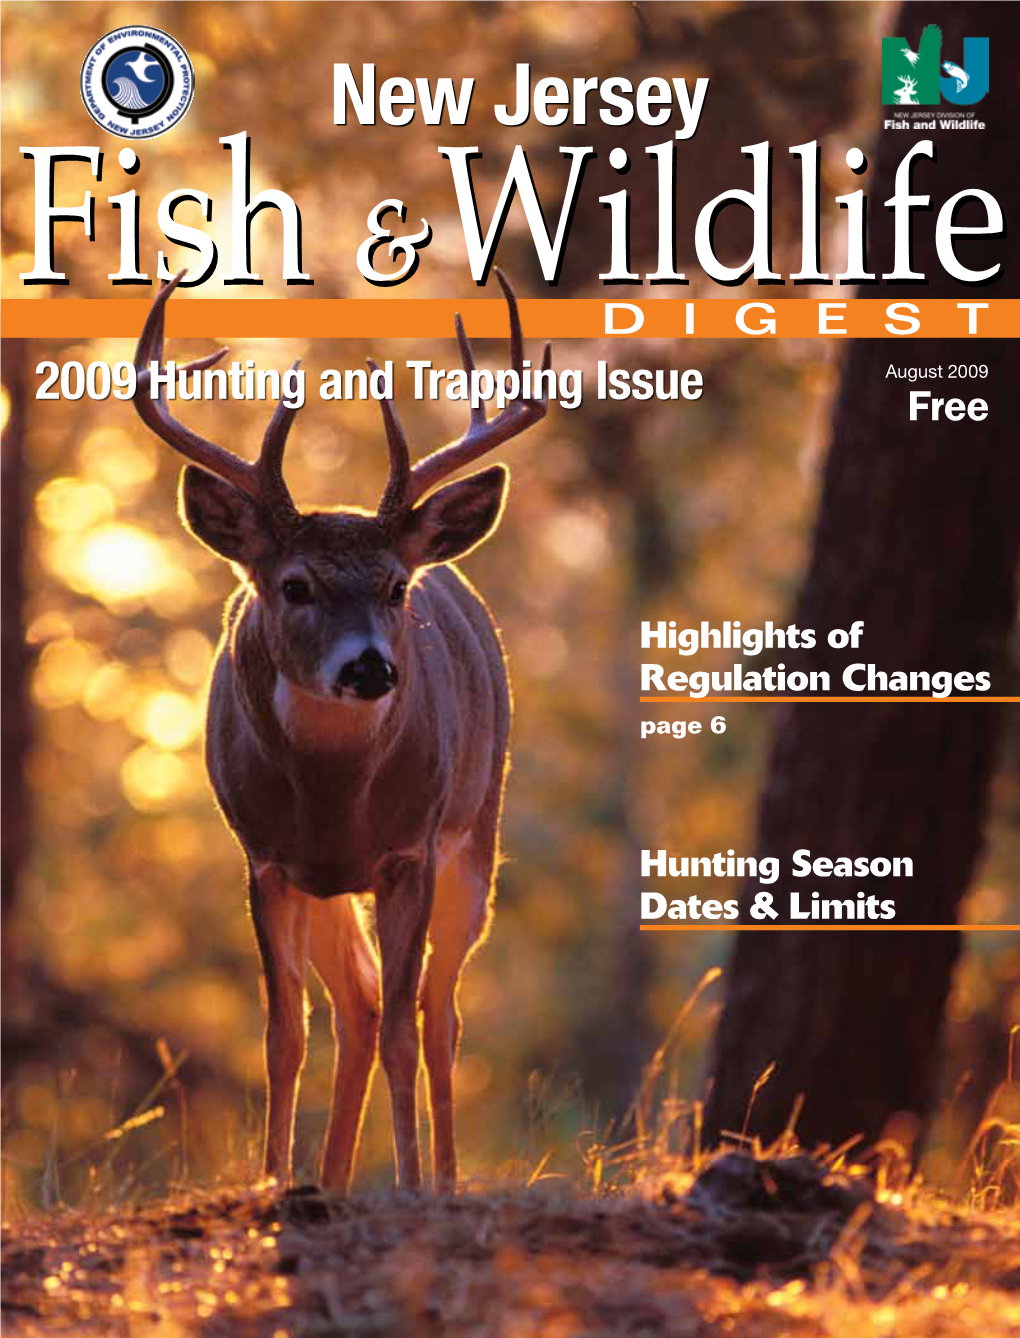 Complete 2009 Hunting Issue of the Fish and Wildlife DIGEST